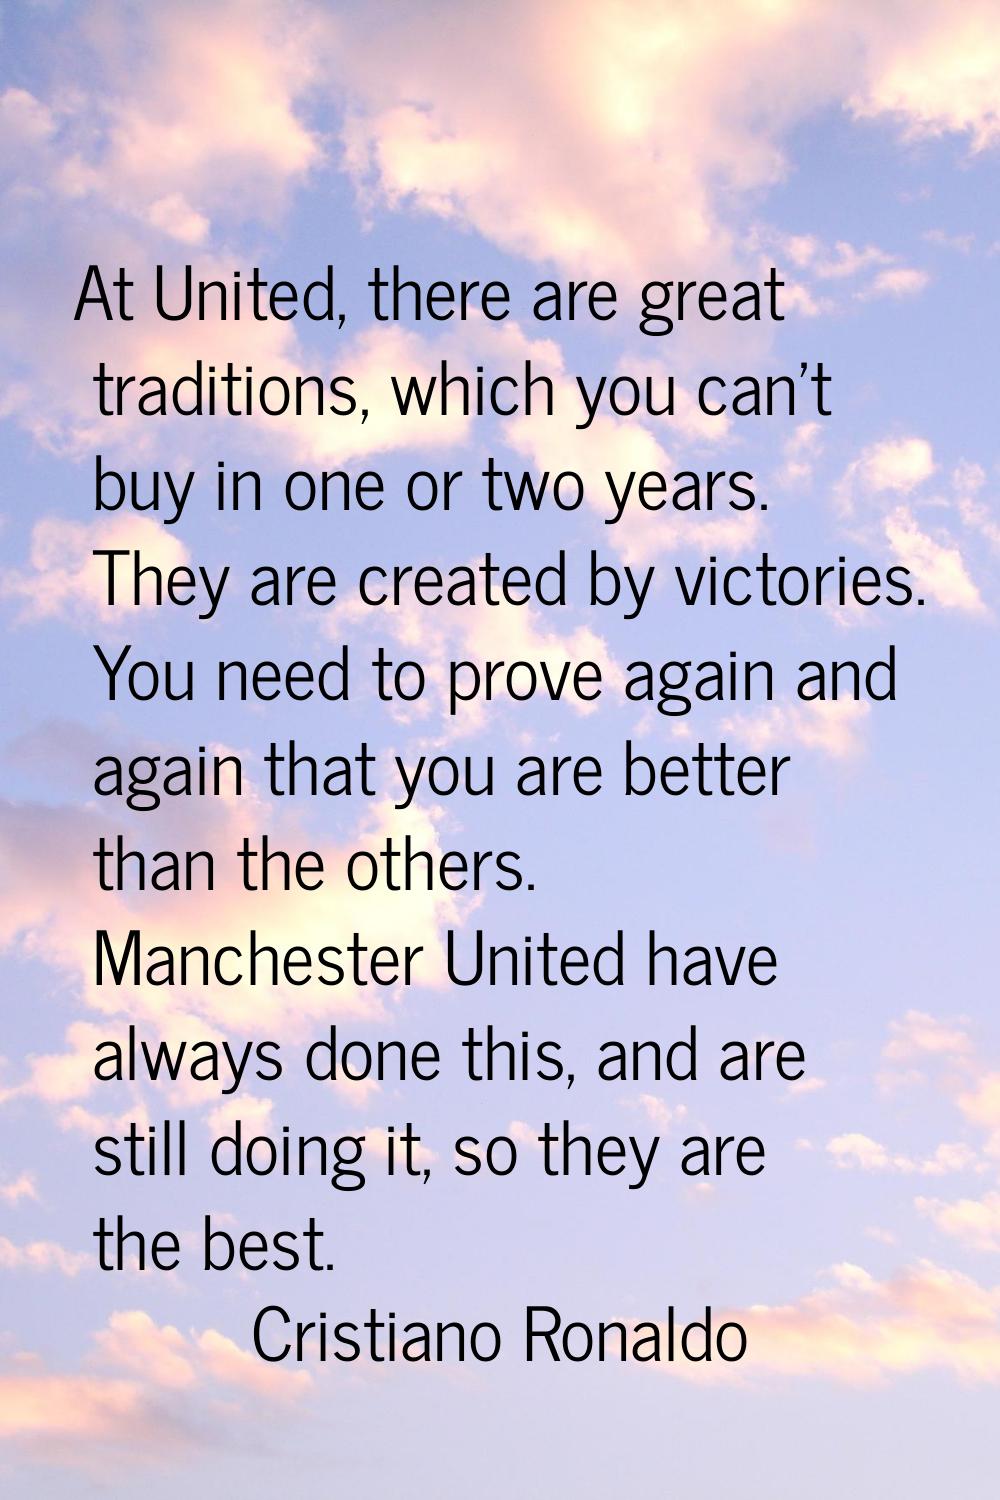 At United, there are great traditions, which you can't buy in one or two years. They are created by